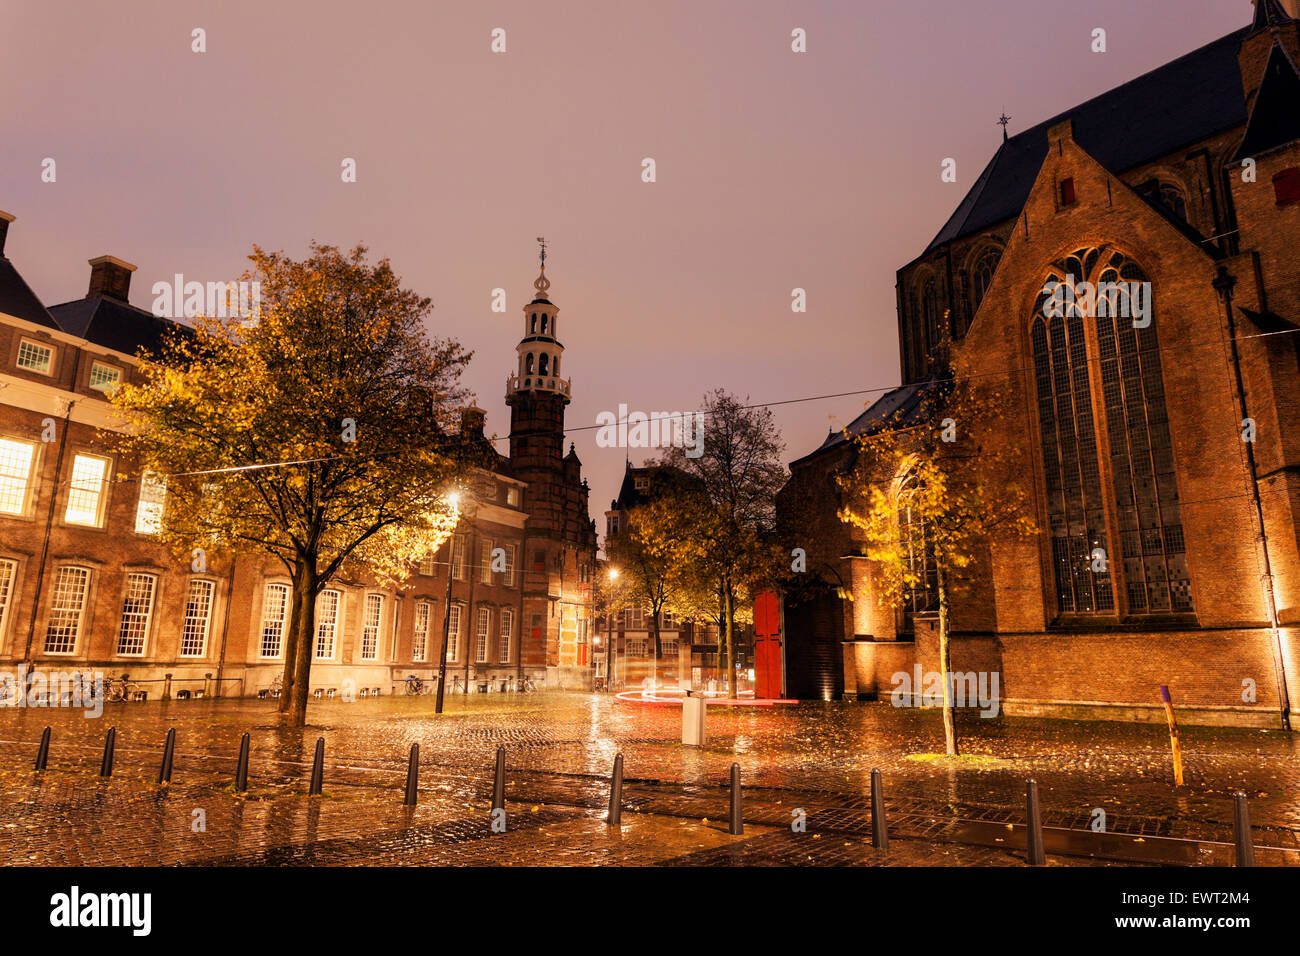 Rainy morning in Hague - Old City Hall. The Hague, South Holland, Netherlands. Stock Photo